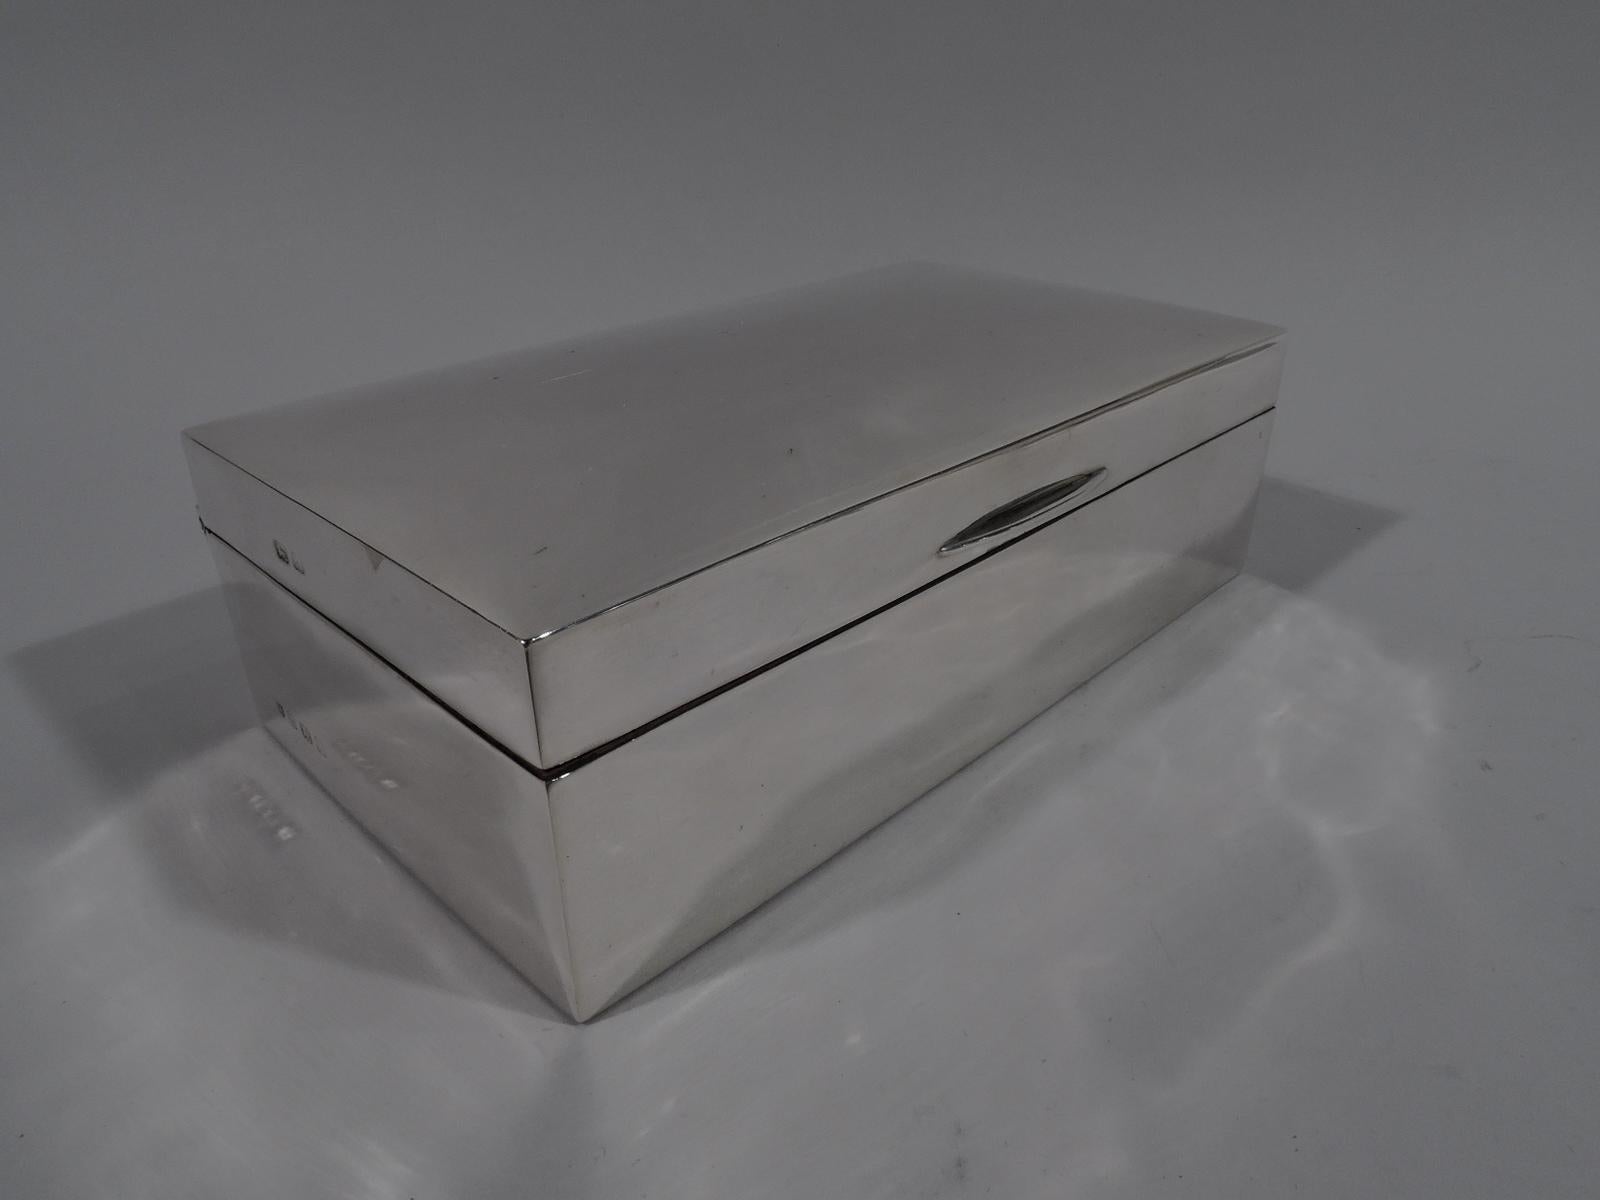 George V sterling silver box. Made by Charles S. Green & Co., Ltd in Birmingham in 1925. Rectangular with straight sides. Cover hinged, tabbed, and gently curved. Box and cover interior cedar lined and partitioned. Box underside leather lined. Smart